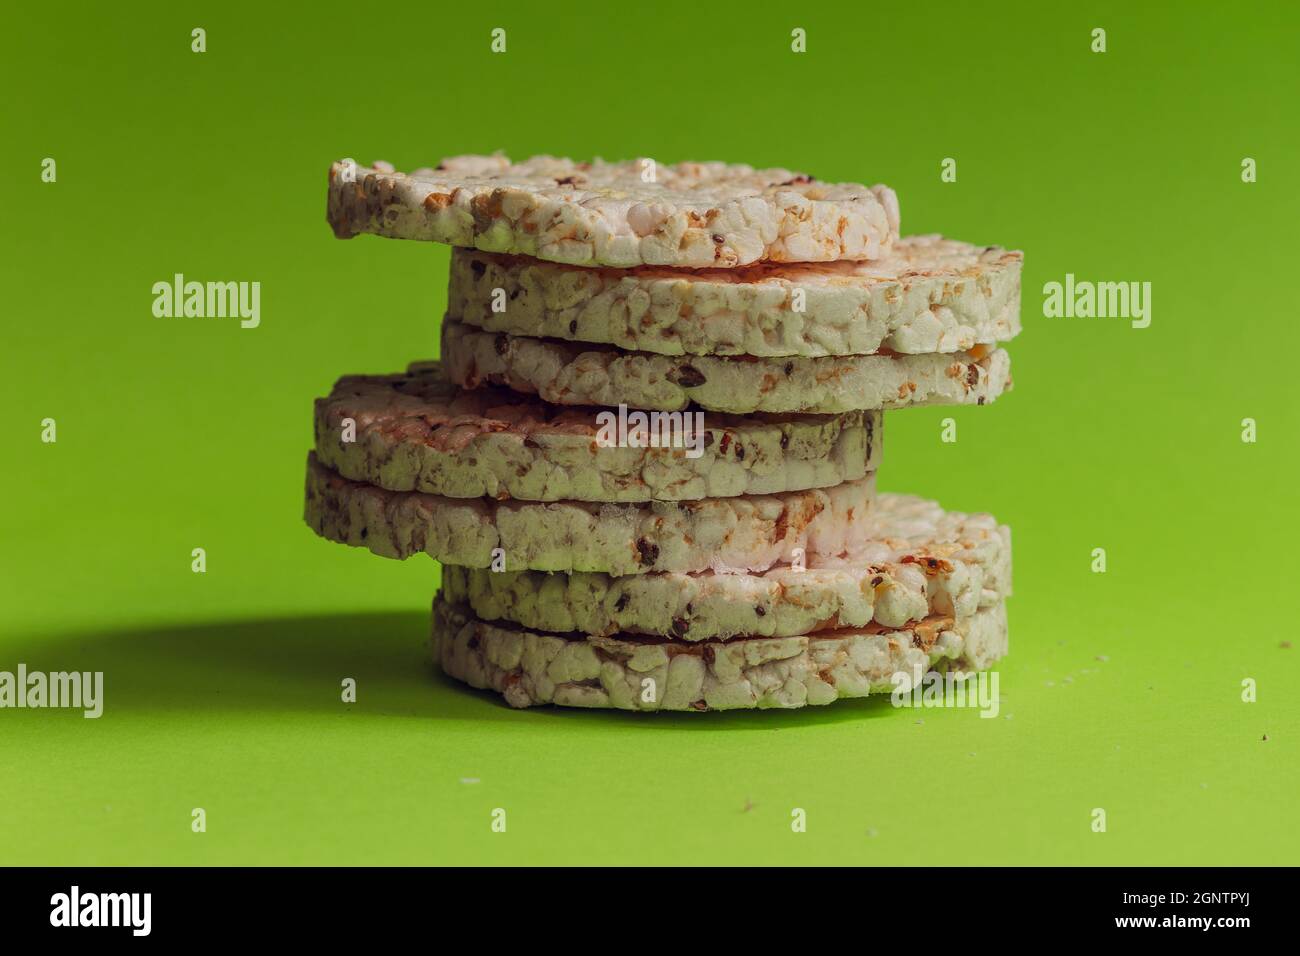 Seven round healthy breads stand in a column against a bright green background. Stock Photo